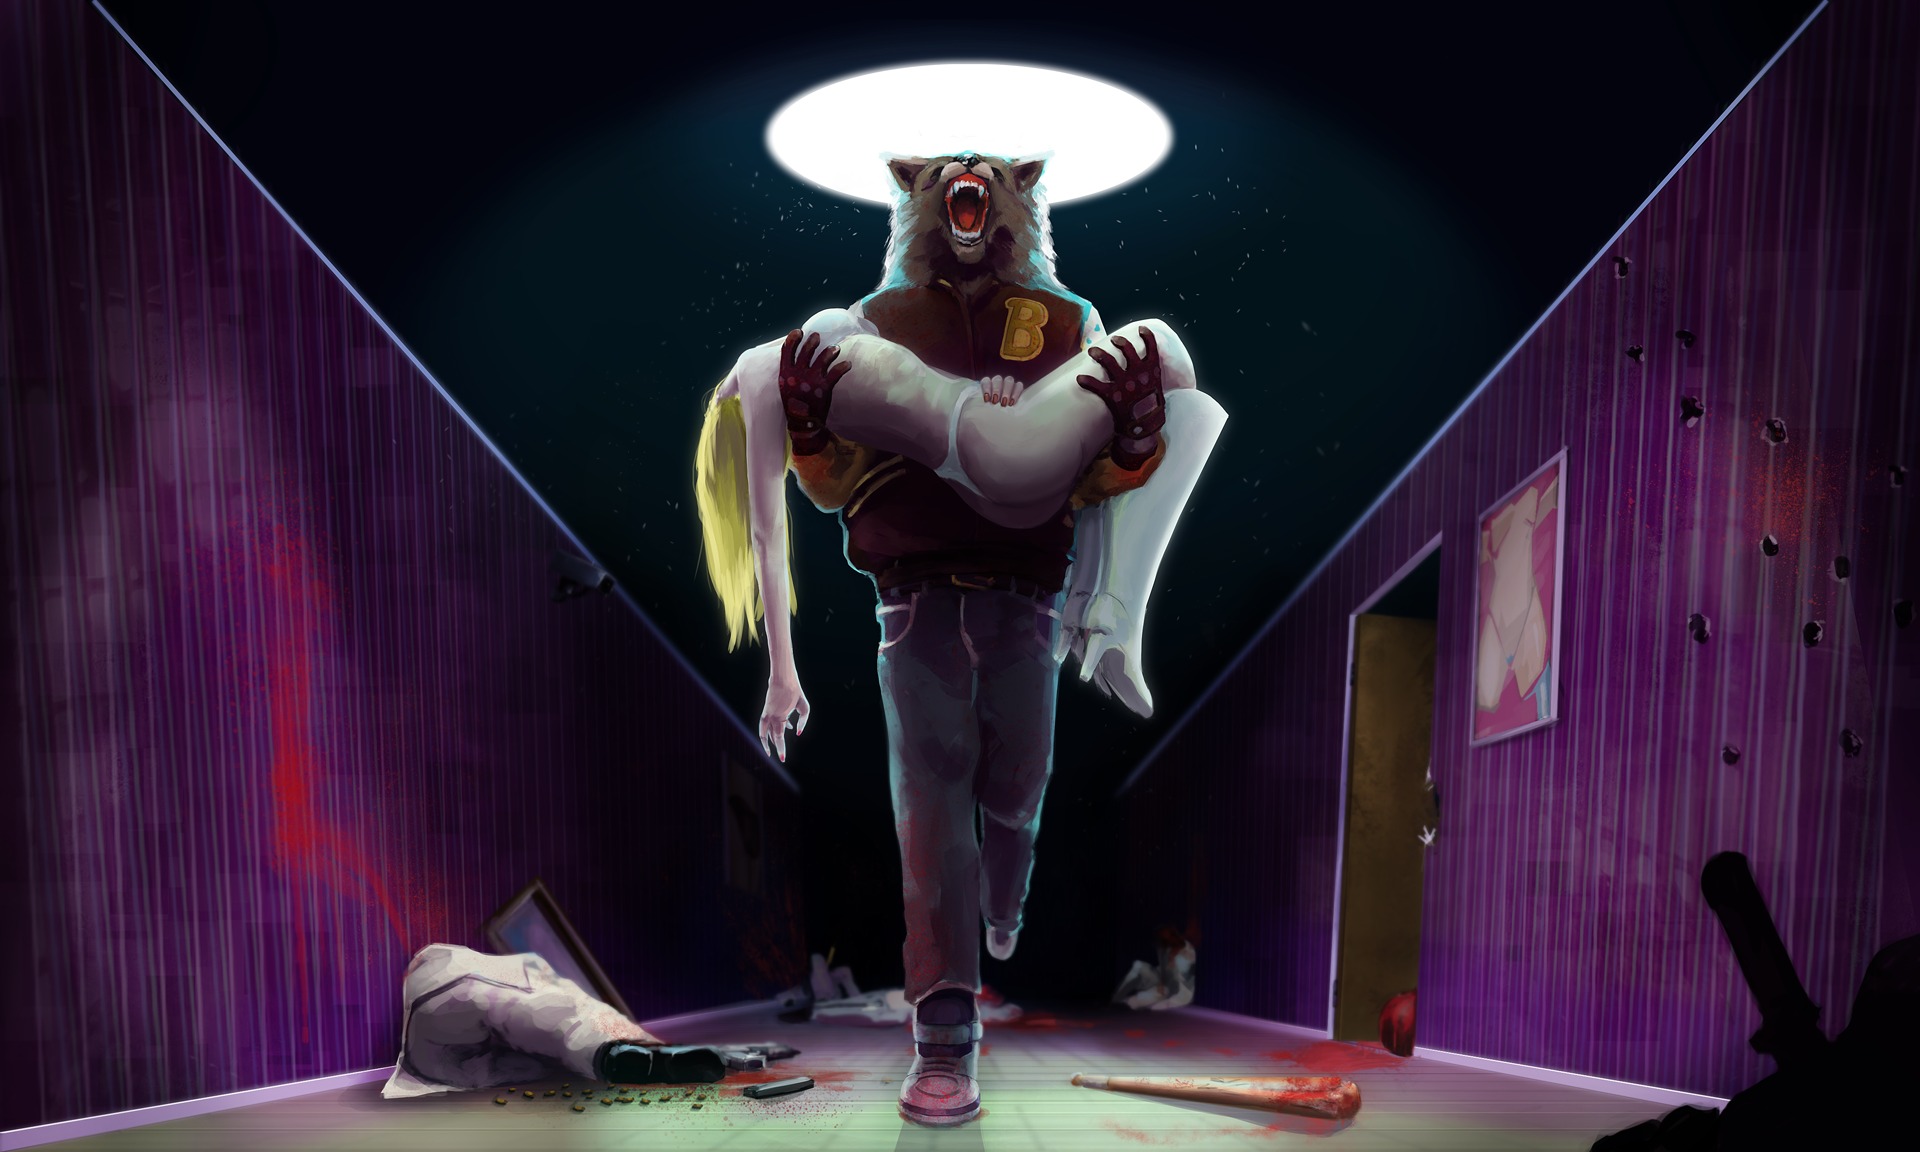 hotline_miami___decadence_by_gameguran-d7fwita.png